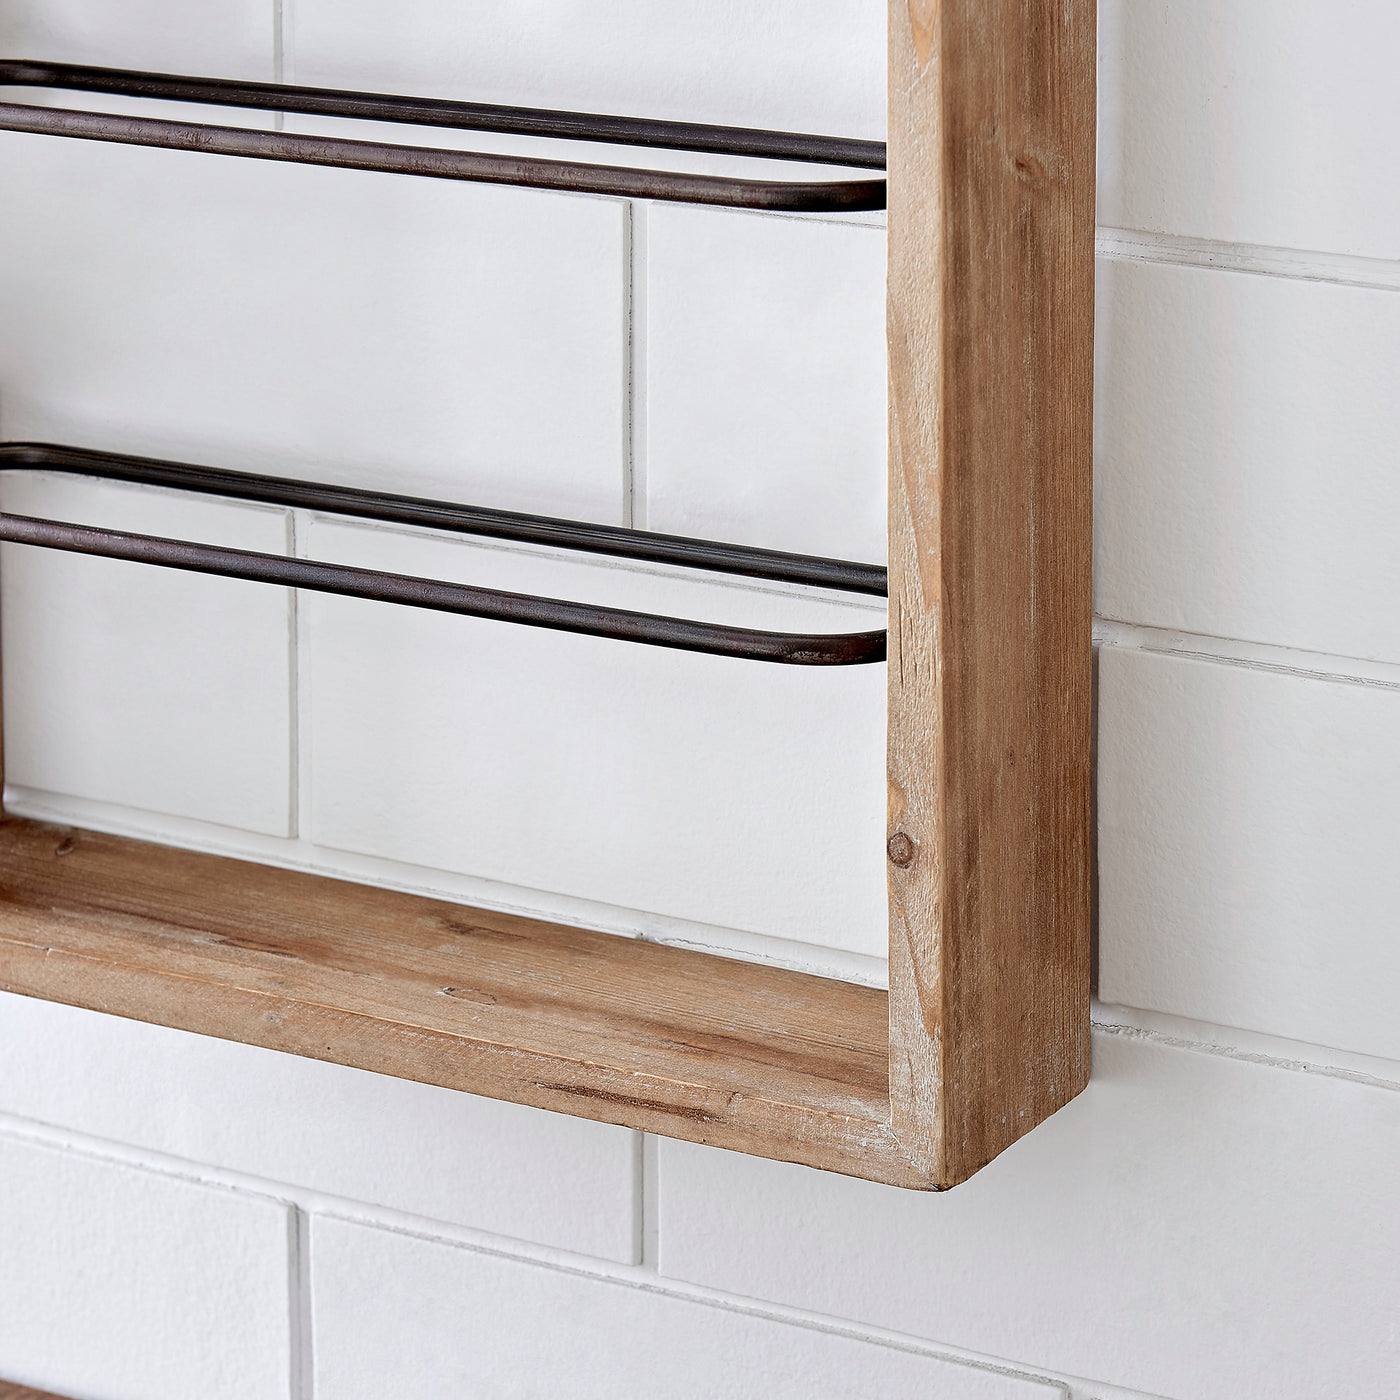 FirsTime & Co. Natural Bakersville Ladder Wine Rack, Farmhouse Style, Made of Wood